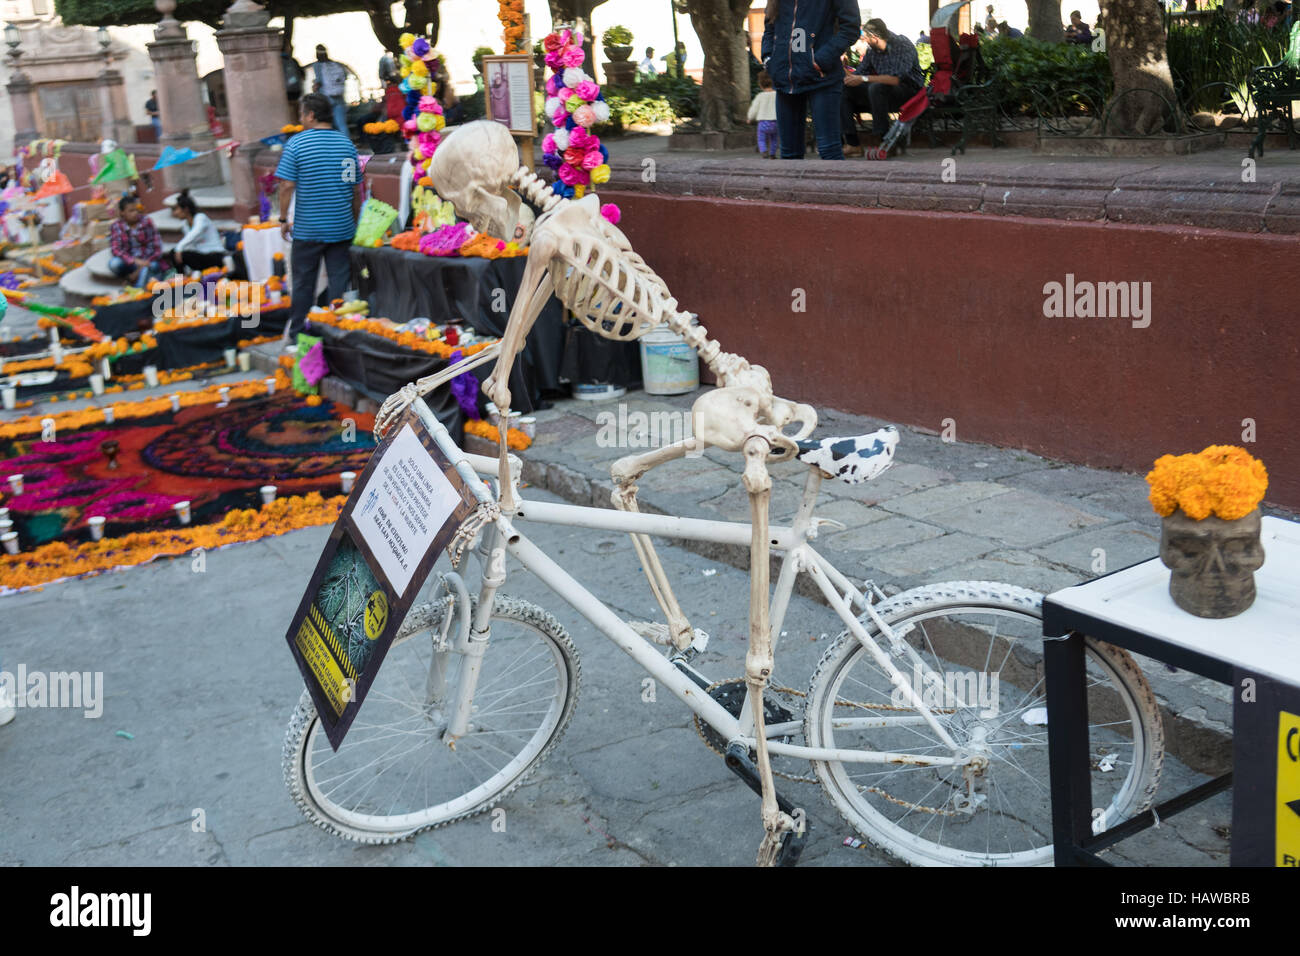 A skeleton on a bicycle in memory of cyclists that lost their lives in accidents during the Day of the Dead festival at the Jardin Principal in San Miguel de Allende, Guanajuato, Mexico. The week-long celebration is a time when Mexicans welcome the dead back to earth for a visit and celebrate life. Stock Photo